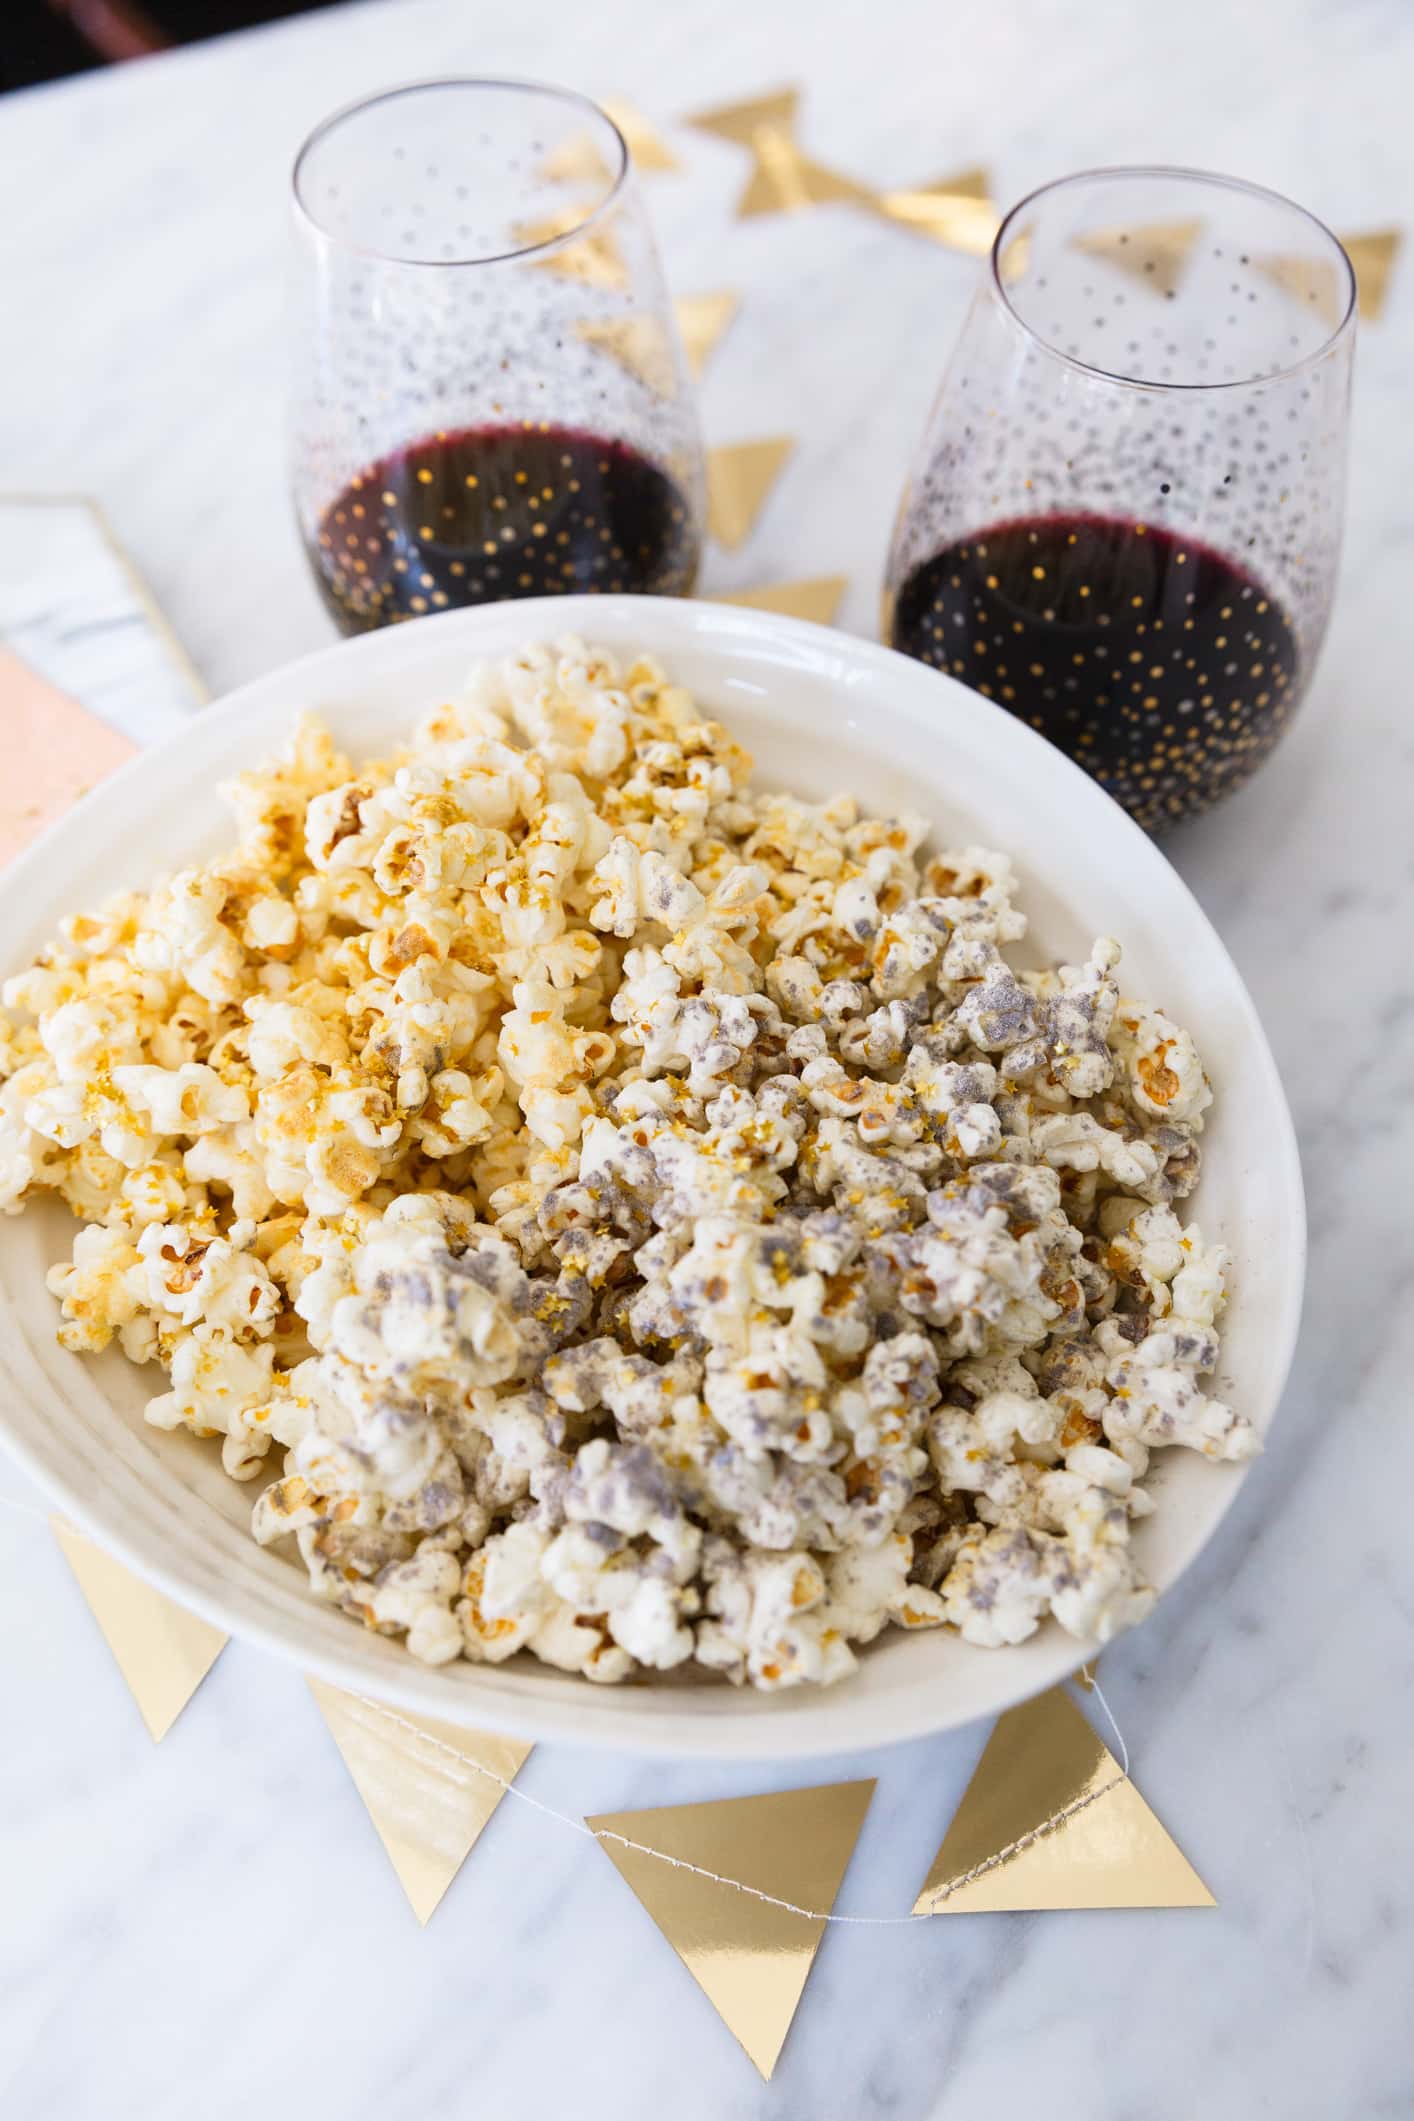 Glitter Popcorn For An Oscars Viewing Party!